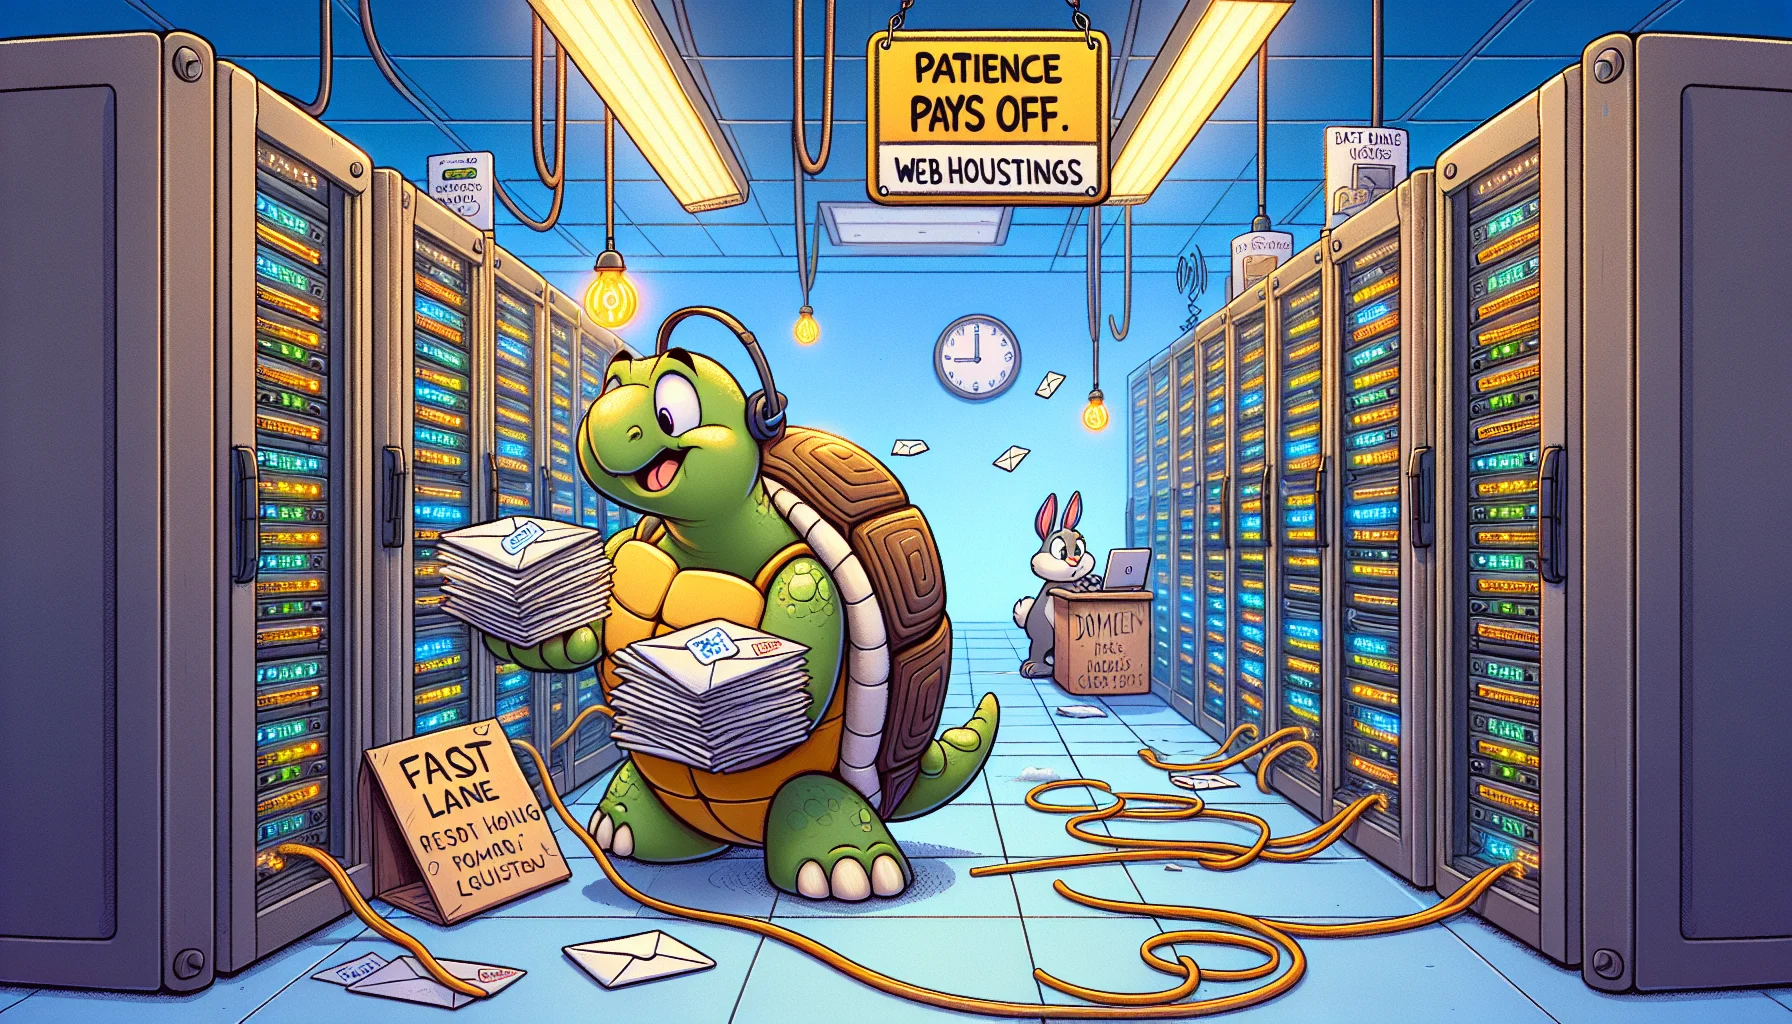 Create a humorous and enticing image displaying the concept of a backorder in a web hosting context. To illustrate this, imagine an old-school server room filled with rack mounts, blinking lights, and flowing cables. In this scene, a friendly anthropomorphic cartoon-style tortoise with a comically oversized headset is attending to the servers, signifying the 'backorder'. The tortoise is seen handling envelope labelled 'Domain Requests', juggling them clumsily. A sign overhead reads 'Patience Pays Off: Web Hosting Queues'. Next to the tortoise, a rabbit with a coffee mug is arranging 'Fast Lane Web Hosting' signages. The scene should stimulate the narrative of the classic tortise and hare adventure in the tech hosting world.